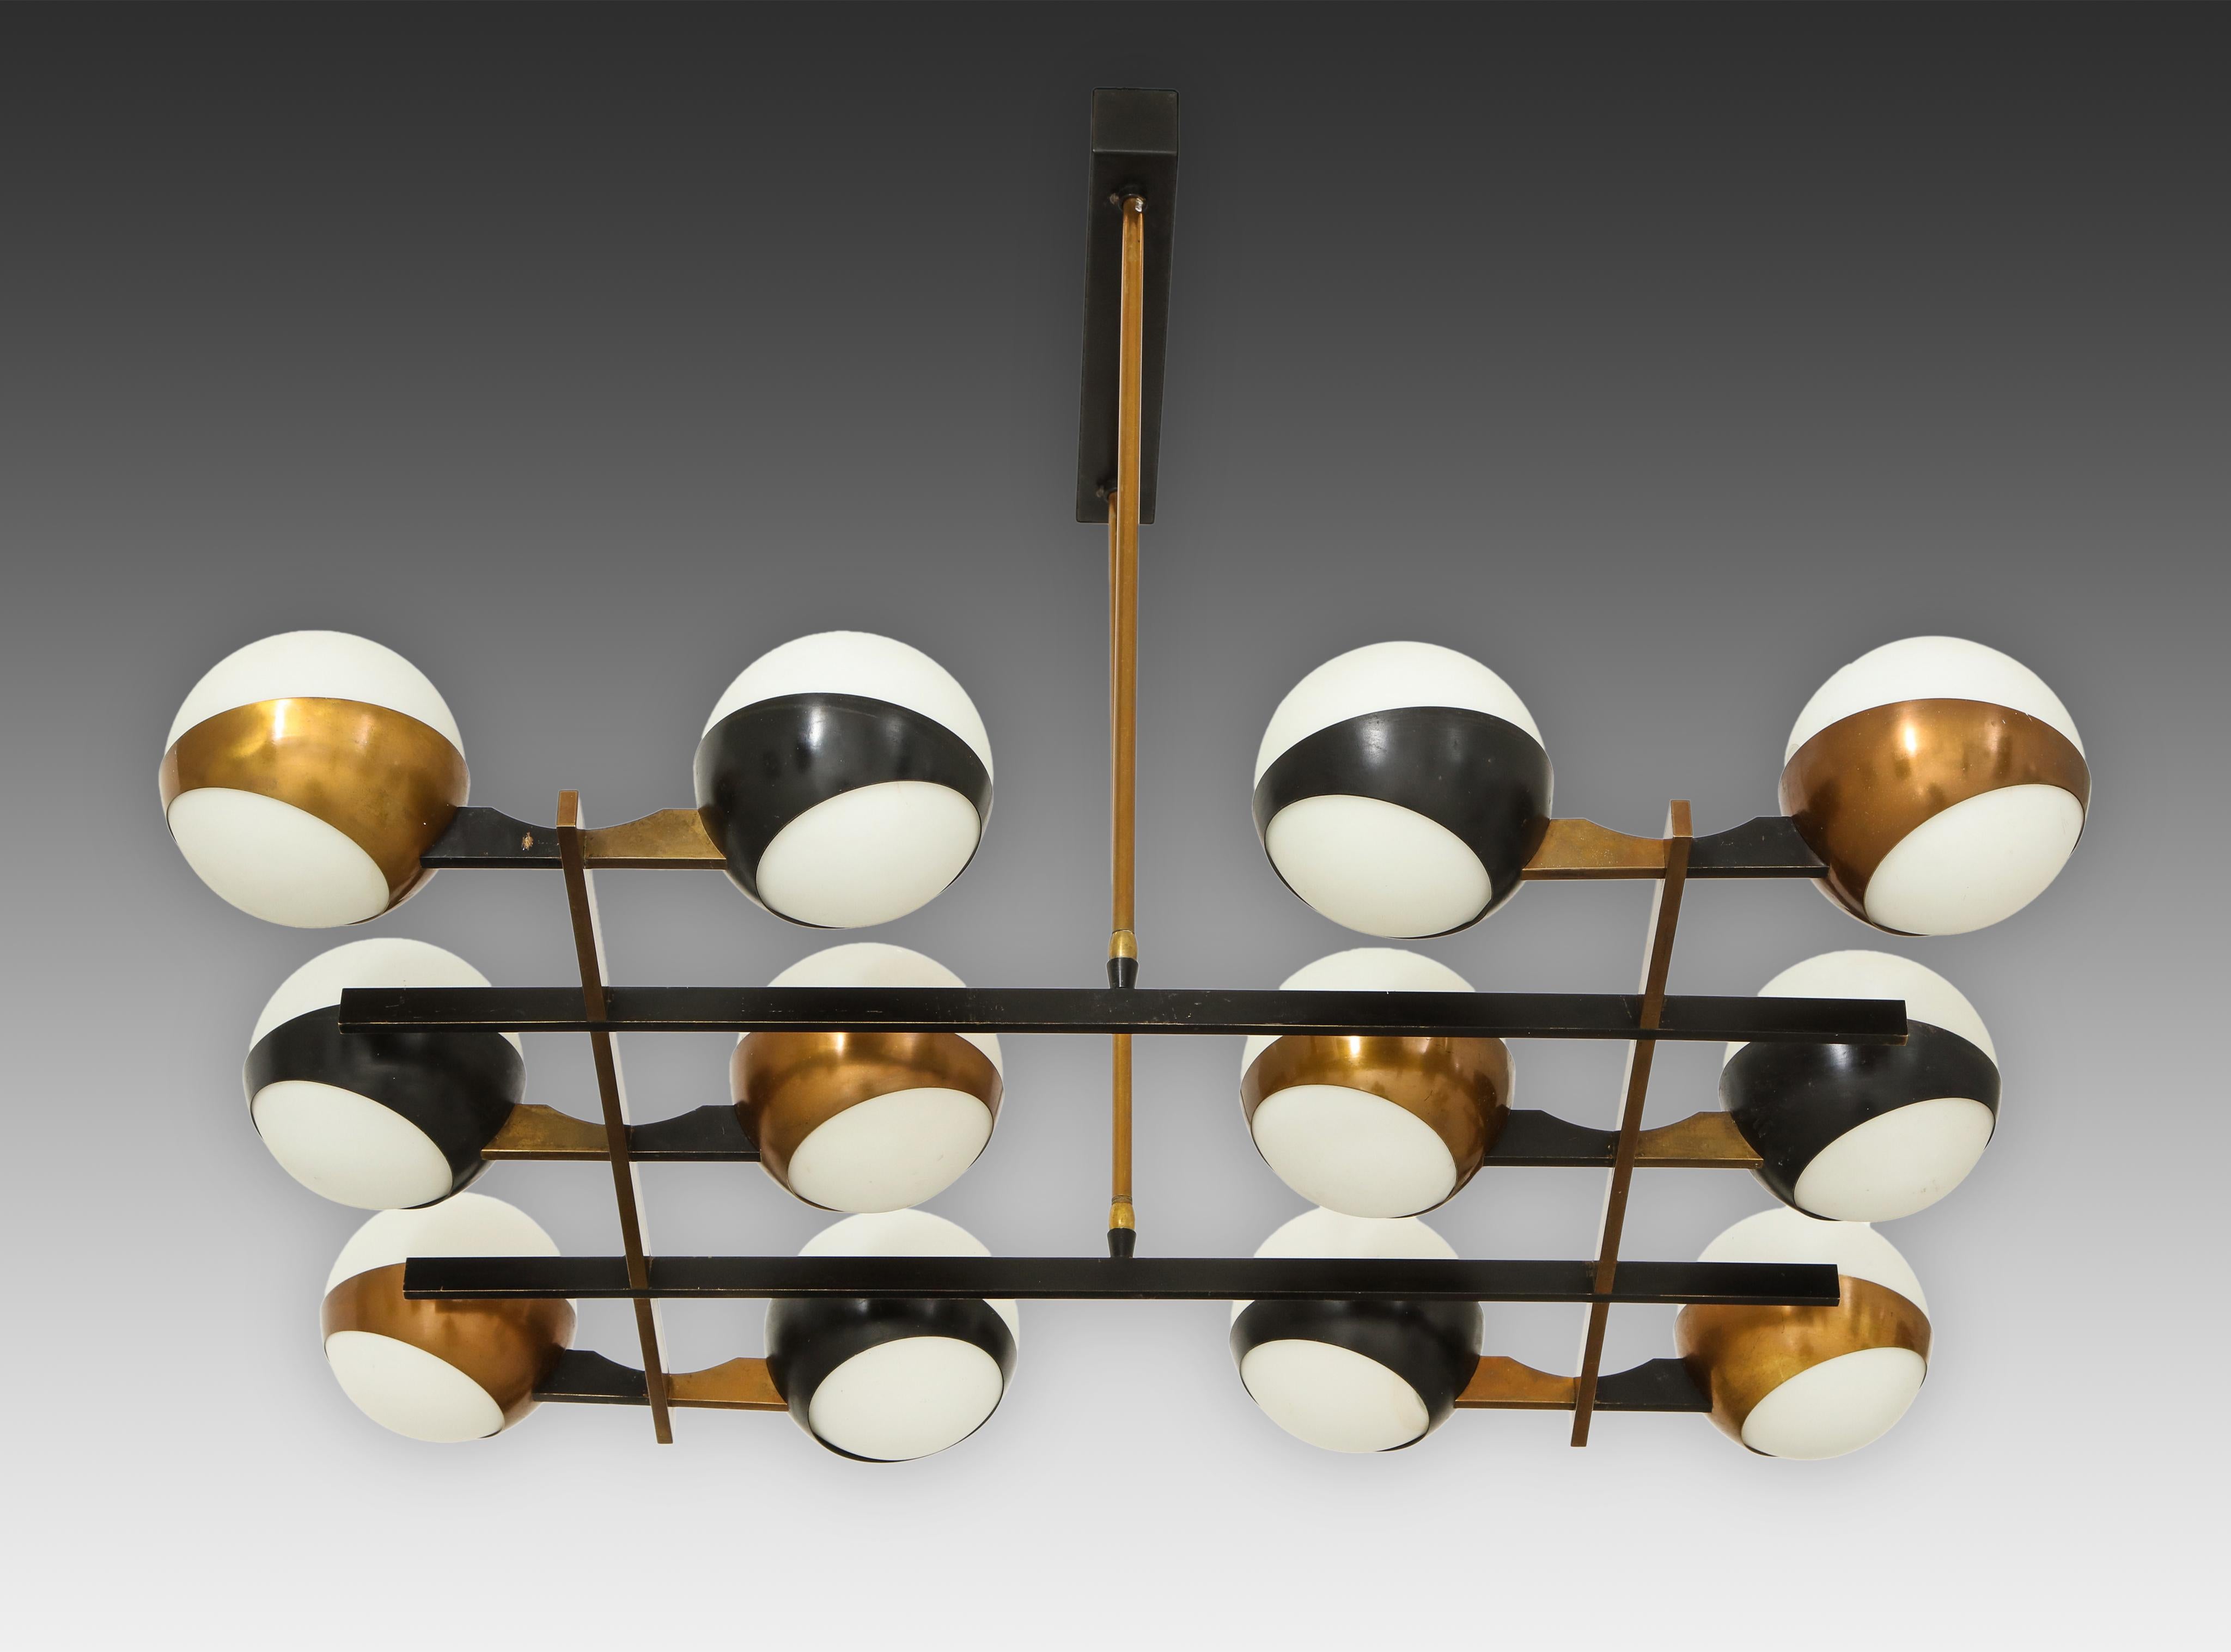 Stilnovo rare and striking chandelier with twelve-opaque glass globes held in brass rings with alternating rings painted black on architectural grid-like structure. The structure is suspended by two brass rods on a black painted rectangular metal